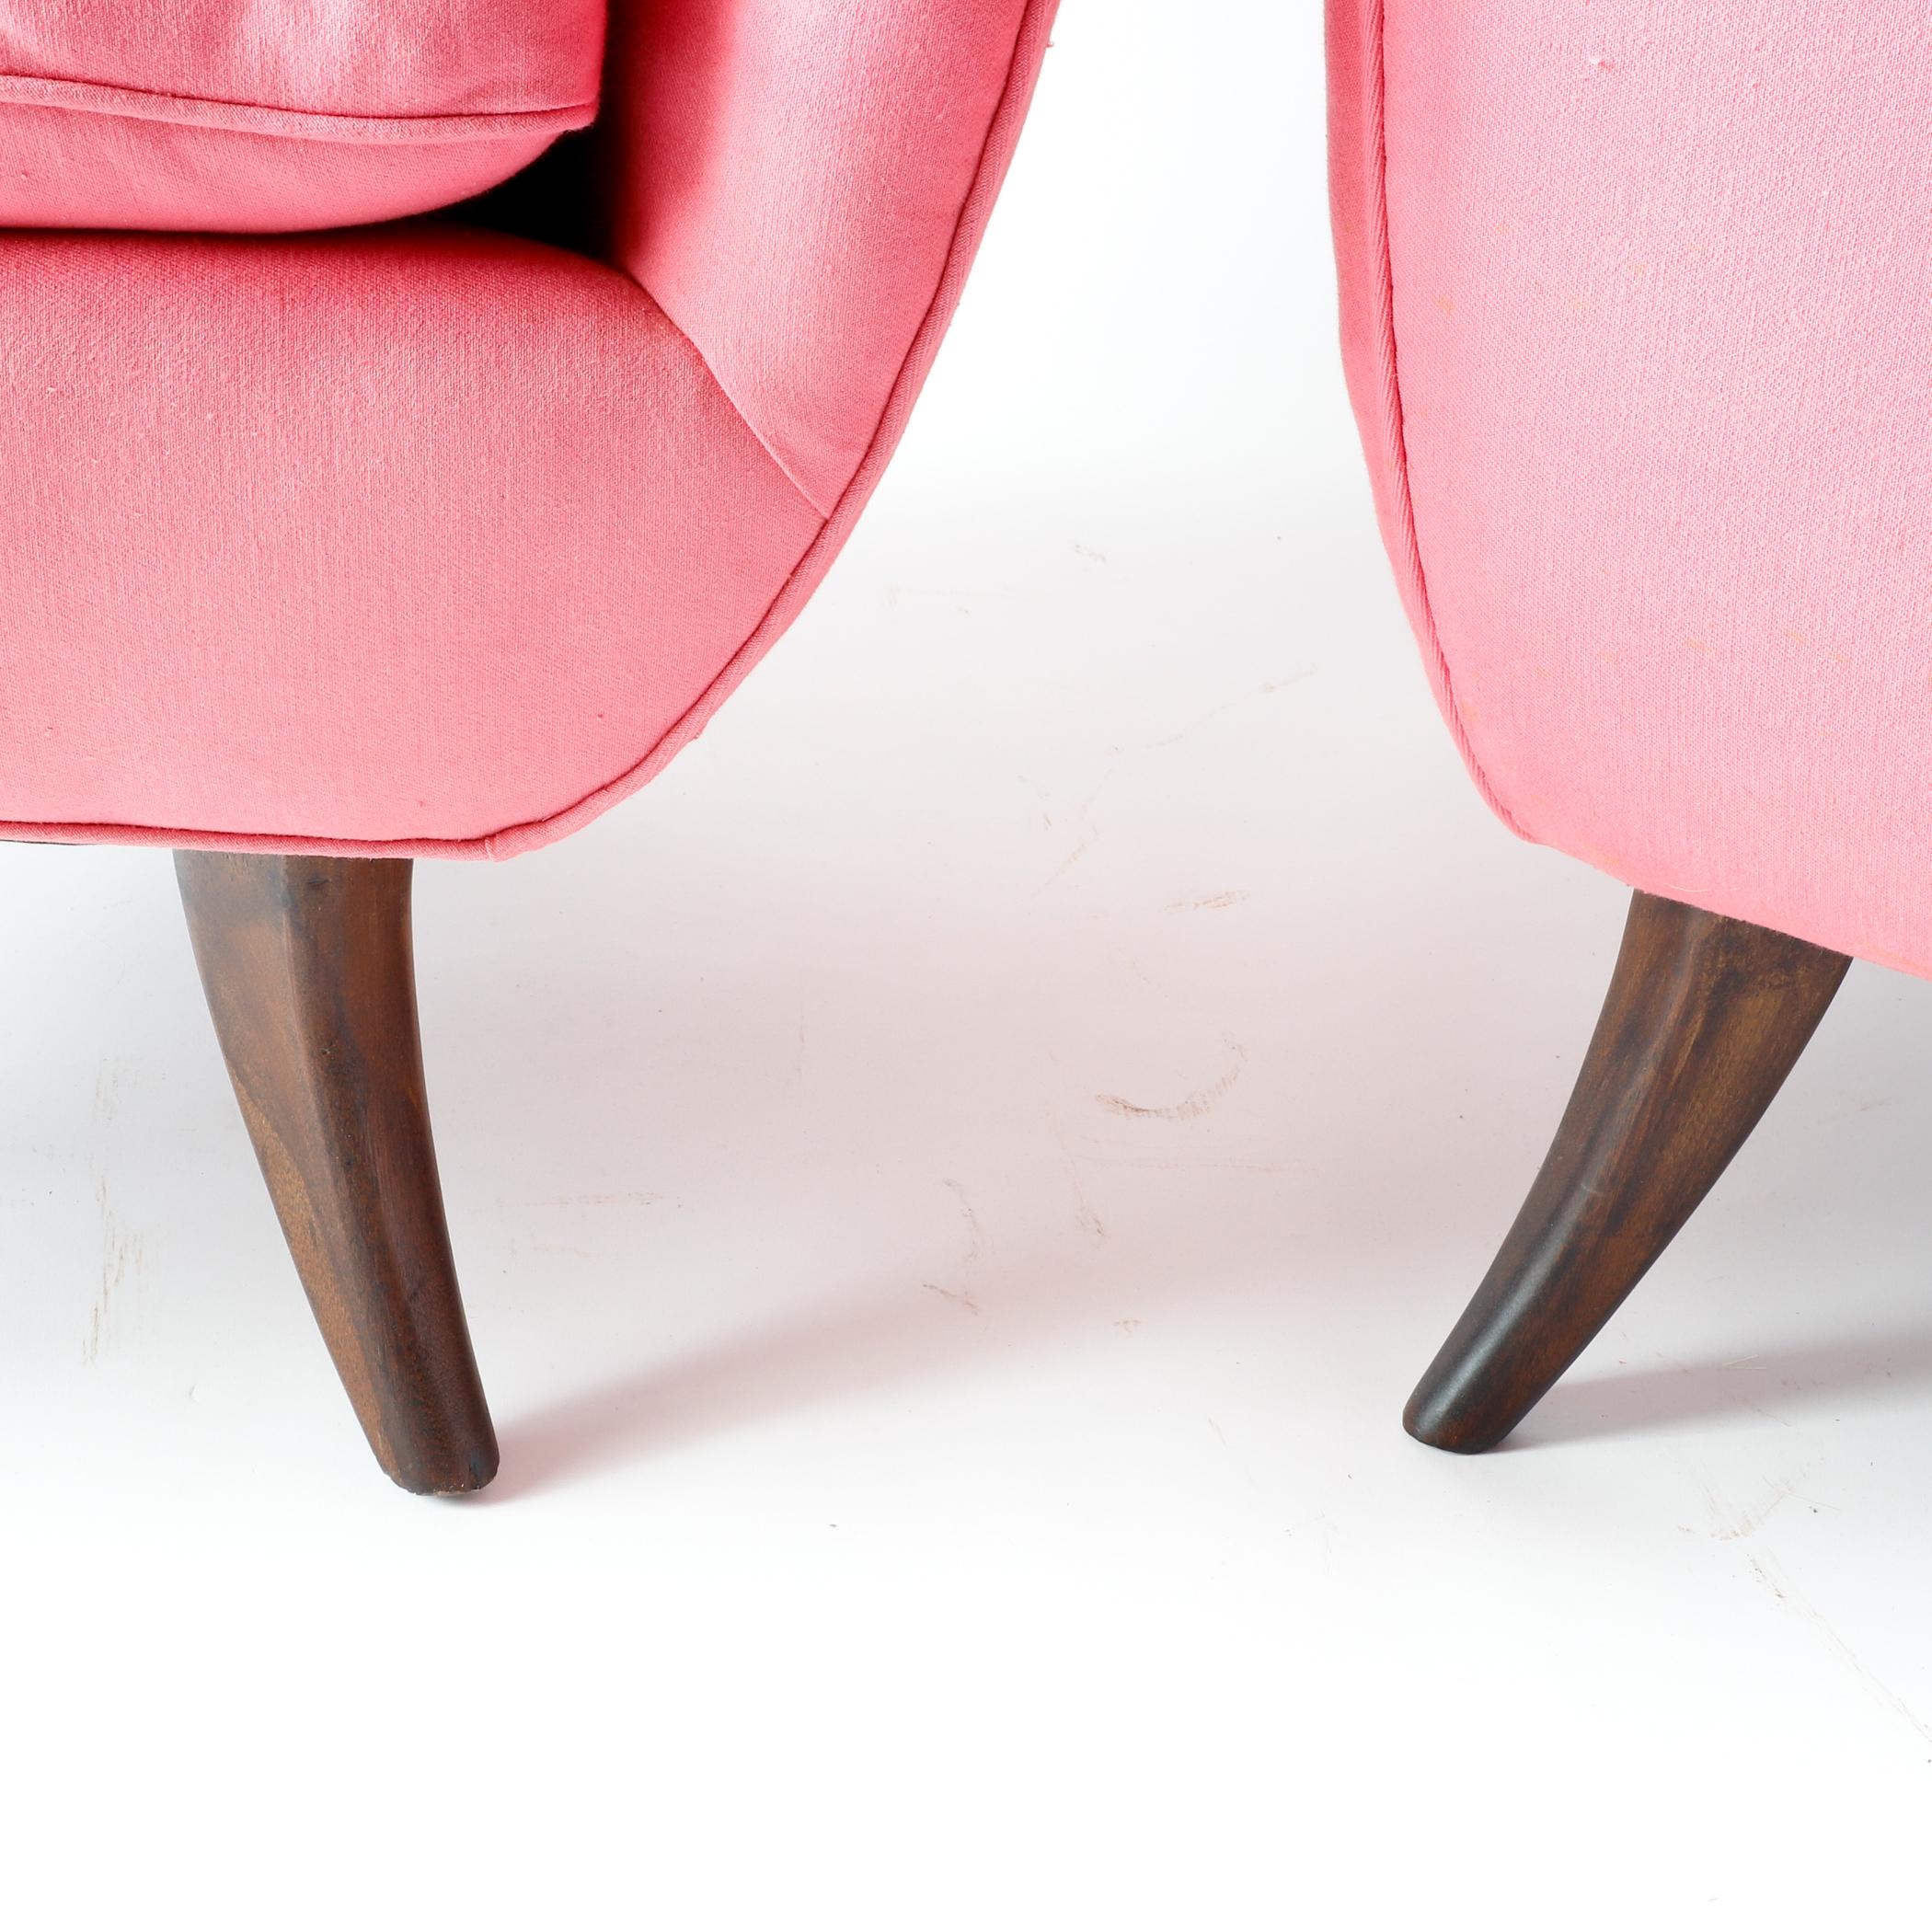 Pair of Ernst Schwadron Upholstered Lounge Chairs, 1940s, Bright Pink For Sale 6